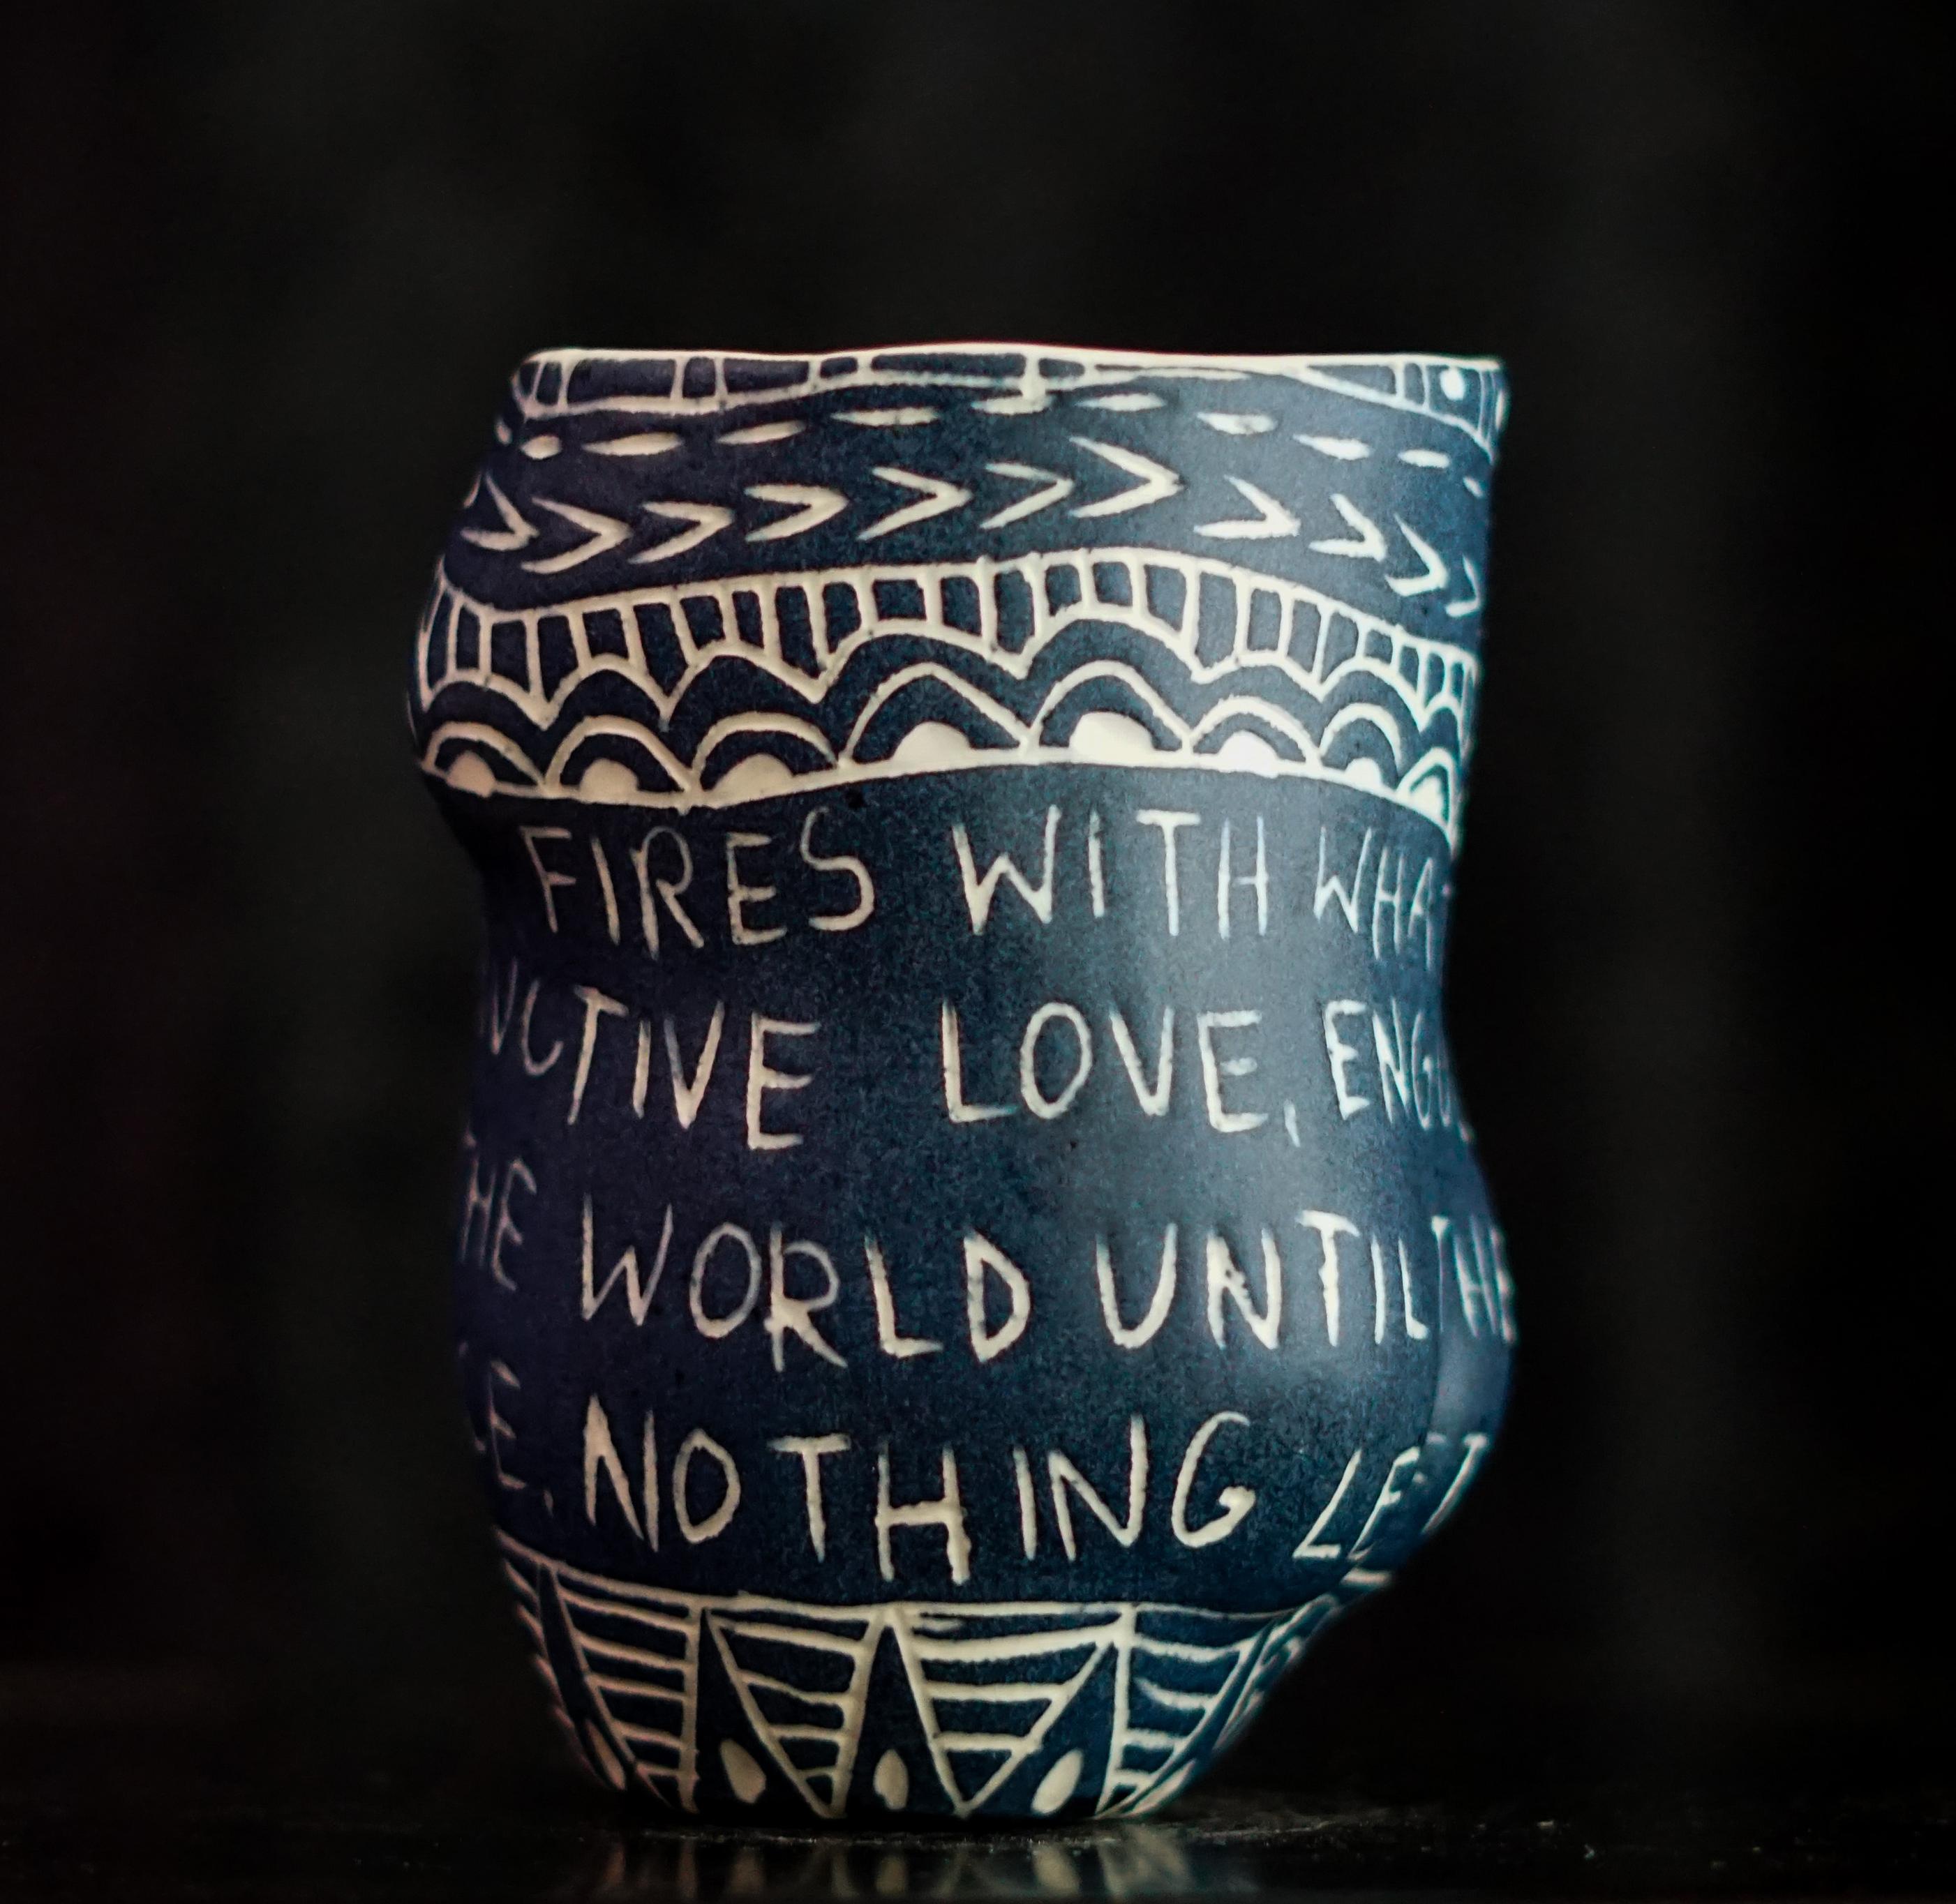 “I Could Start Fires...” 2019
From the series Fragments of Our Love Story
Porcelain cup with sgraffito detailing
5 x 3 x 3 inches.

“I could start fires...” I could start fires with what I feel for you. Destructive love. Engulfing flames.
Burn the